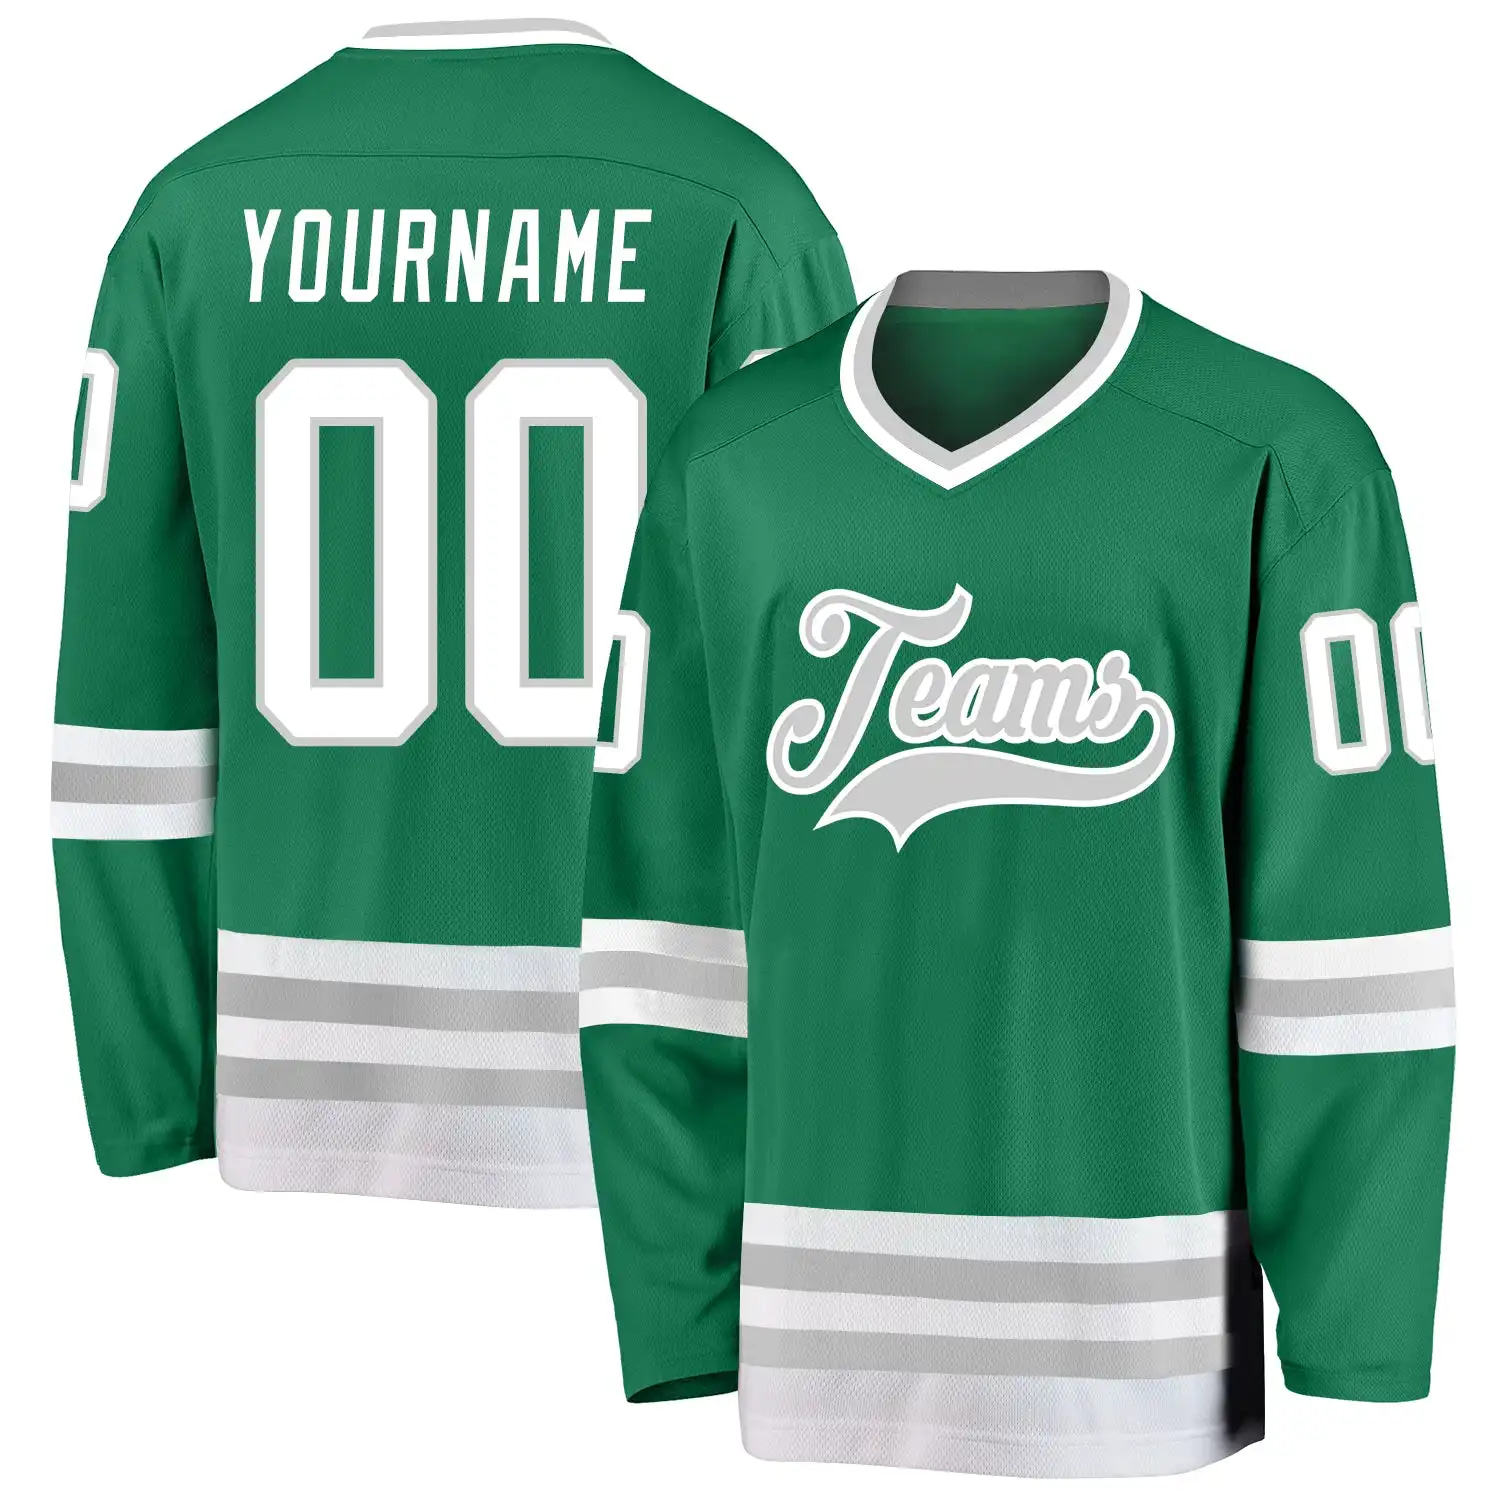 Stitched And Print Kelly Green White-Gray Hockey Jersey Custom